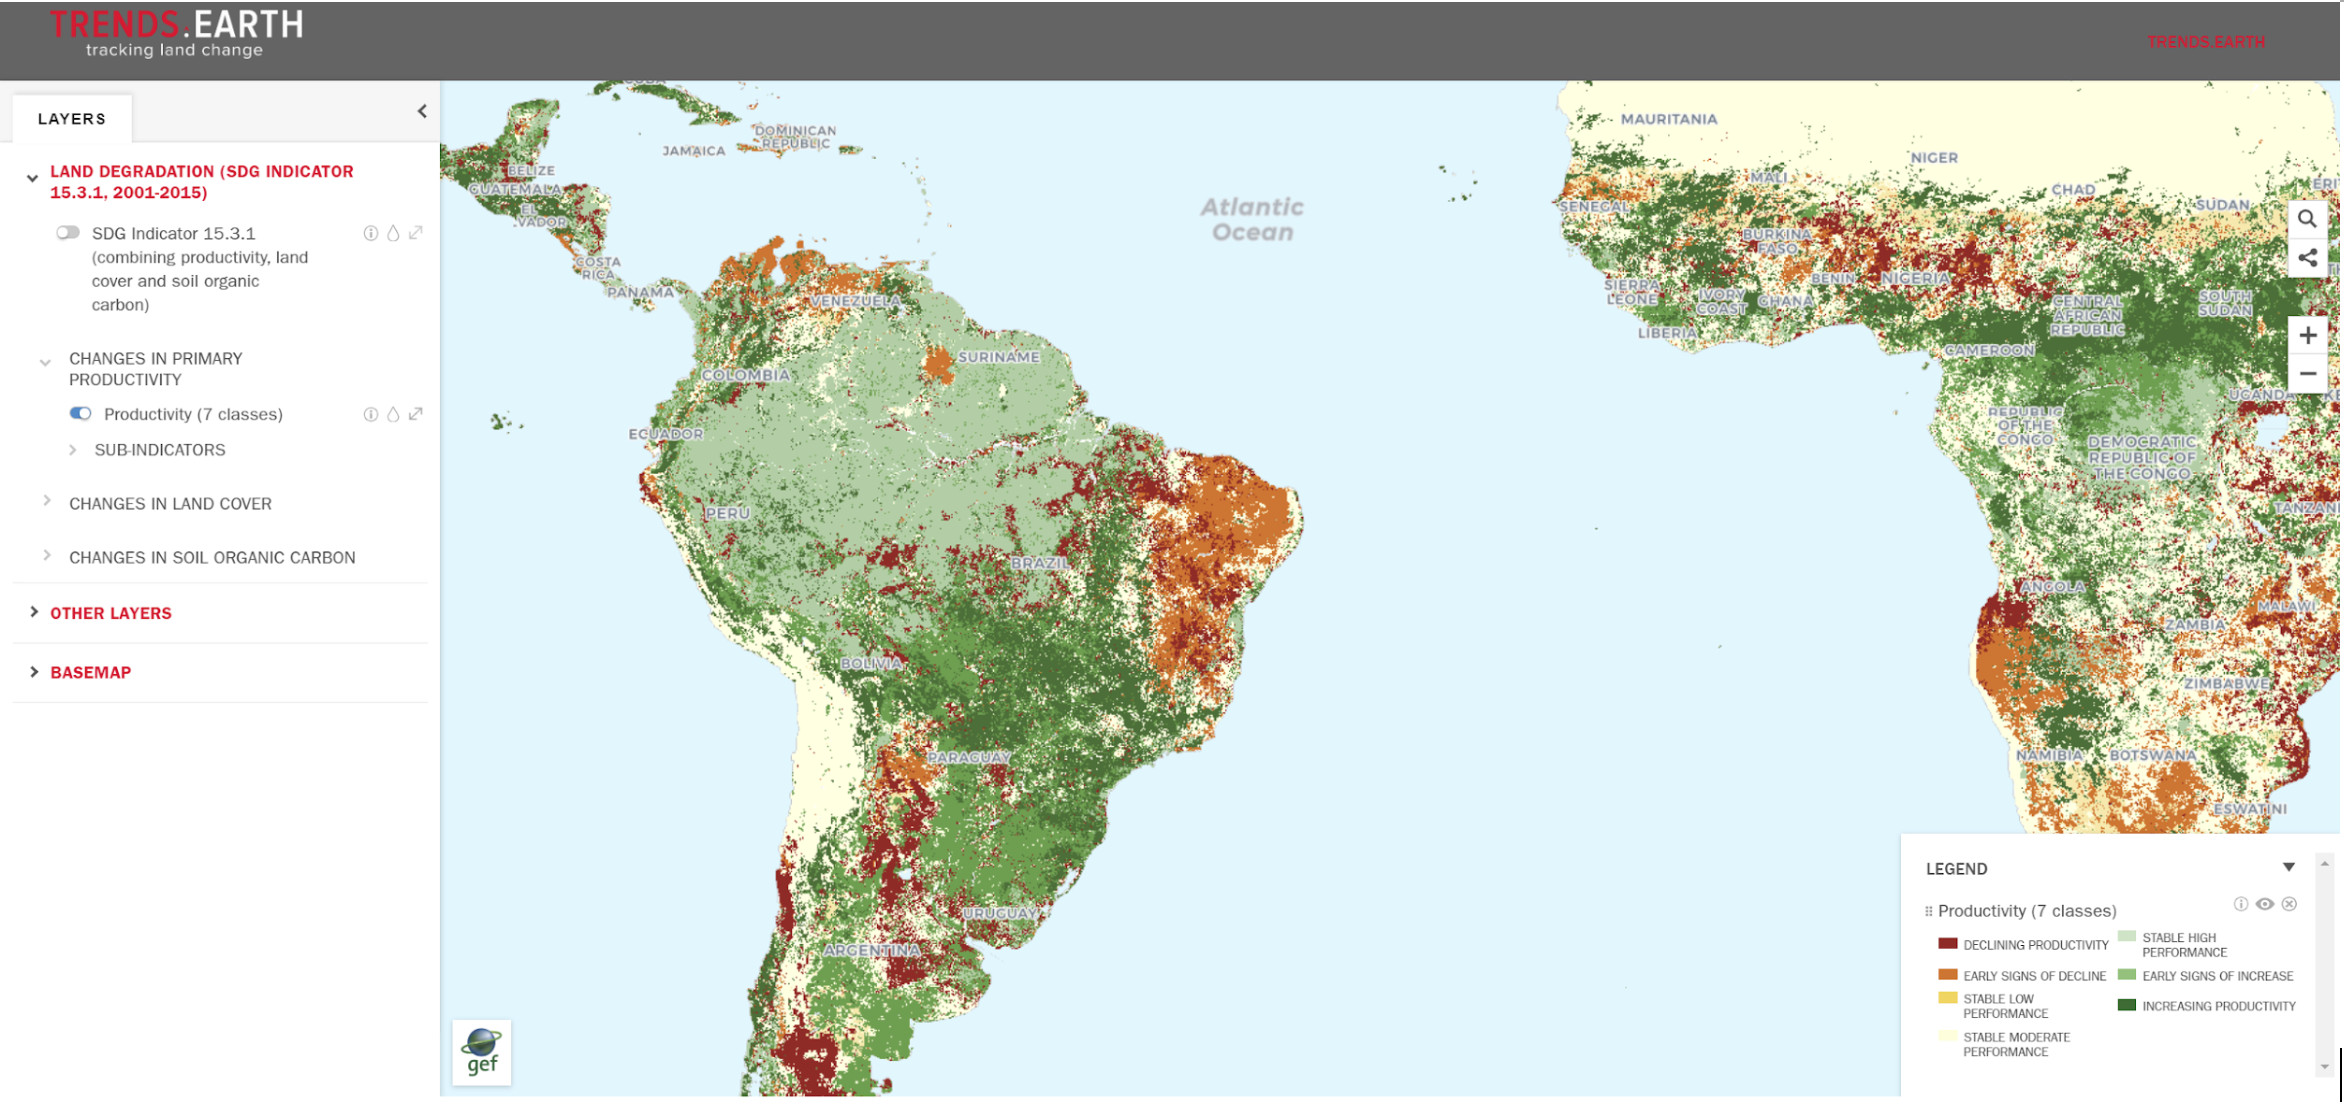 Image from Trends.Earth Resilience Atlas. Trends.Earth currently allows users to assess land degradation using desktop software. With the help of Google Earth Engine, we will produce a cloud-based web platform that will make the analysis more dynamic and relevant at local scales through the use of Landsat and Sentinel data.